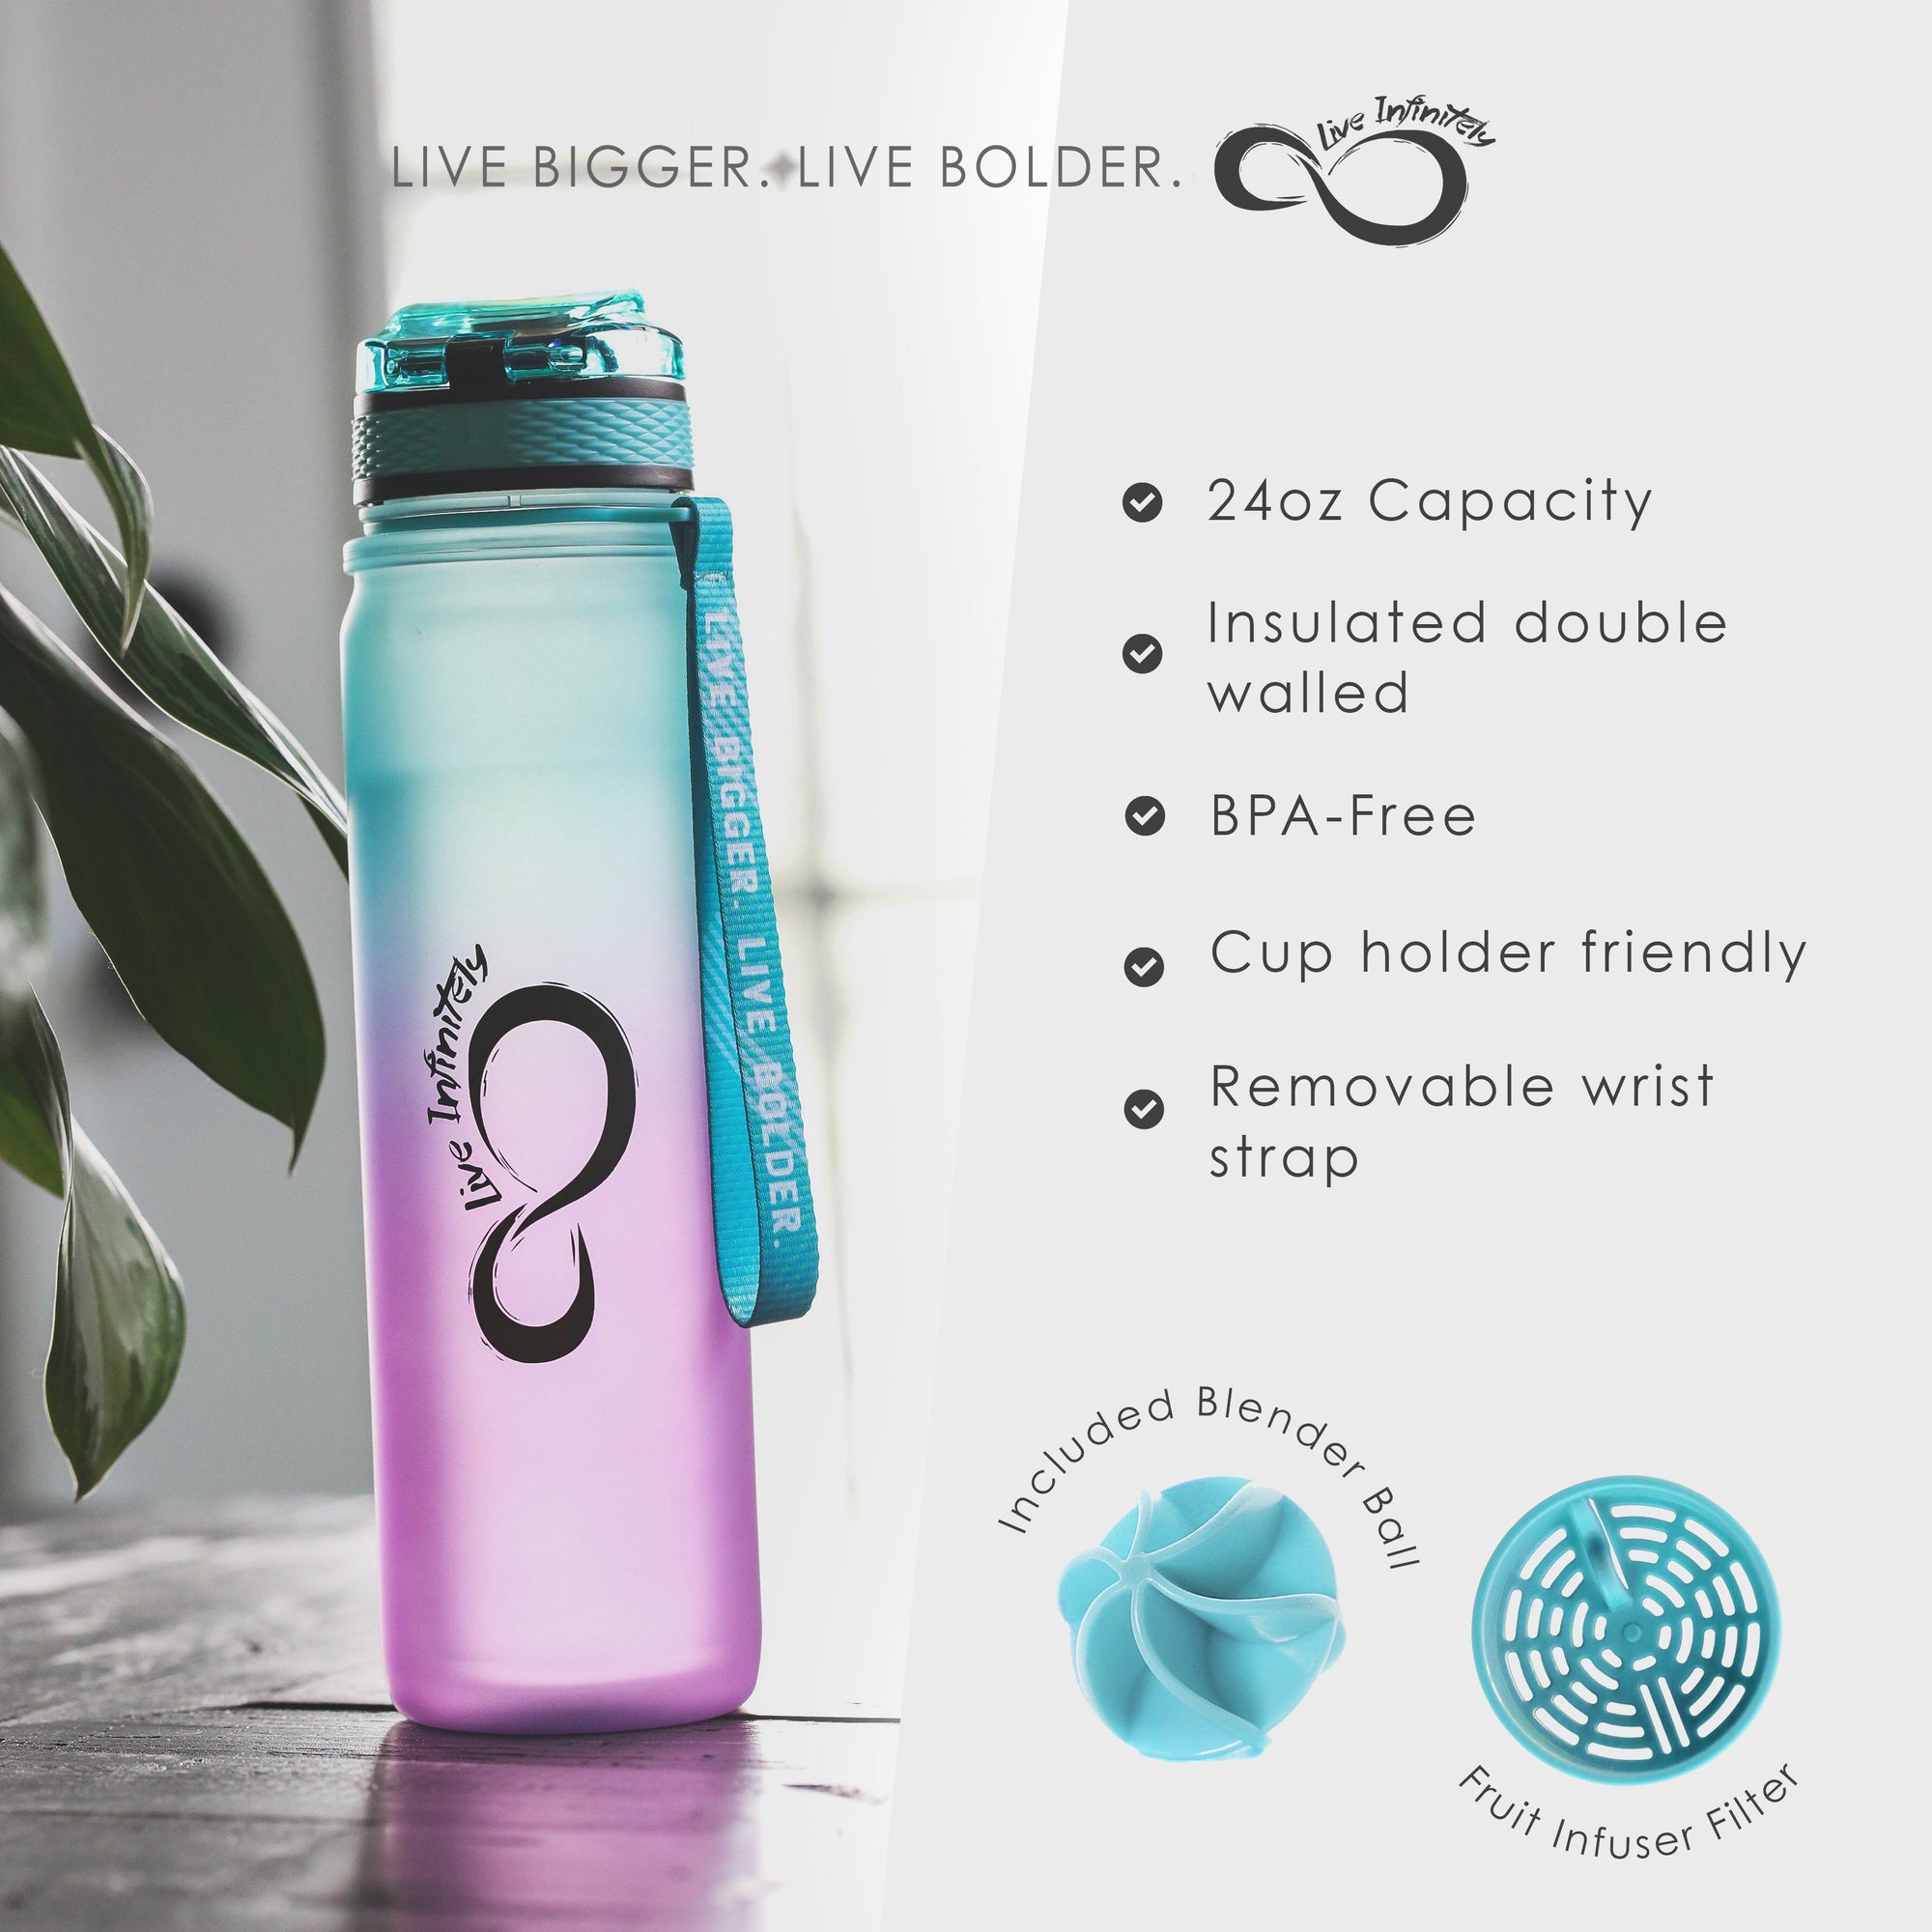 Live Infinitely Gym Water Bottle with Time Marker Fruit Infuser and Shaker 34 oz Sea Glass